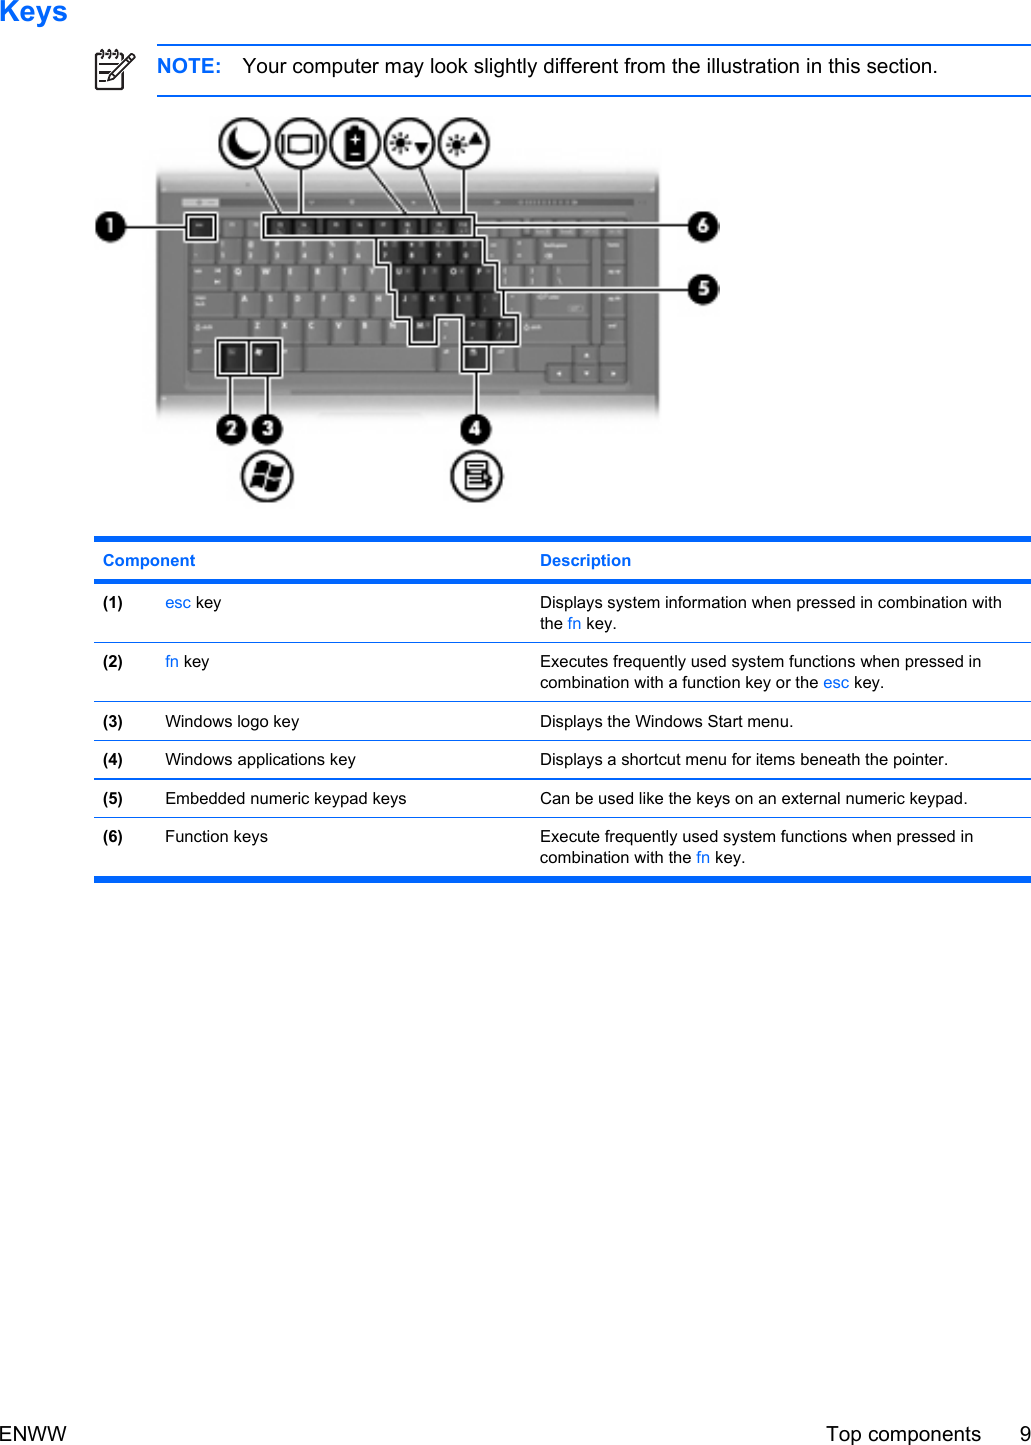 KeysNOTE: Your computer may look slightly different from the illustration in this section.Component Description(1) esc key Displays system information when pressed in combination withthe fn key.(2) fn key Executes frequently used system functions when pressed incombination with a function key or the esc key.(3) Windows logo key Displays the Windows Start menu.(4) Windows applications key Displays a shortcut menu for items beneath the pointer.(5) Embedded numeric keypad keys Can be used like the keys on an external numeric keypad.(6) Function keys Execute frequently used system functions when pressed incombination with the fn key.ENWW Top components 9